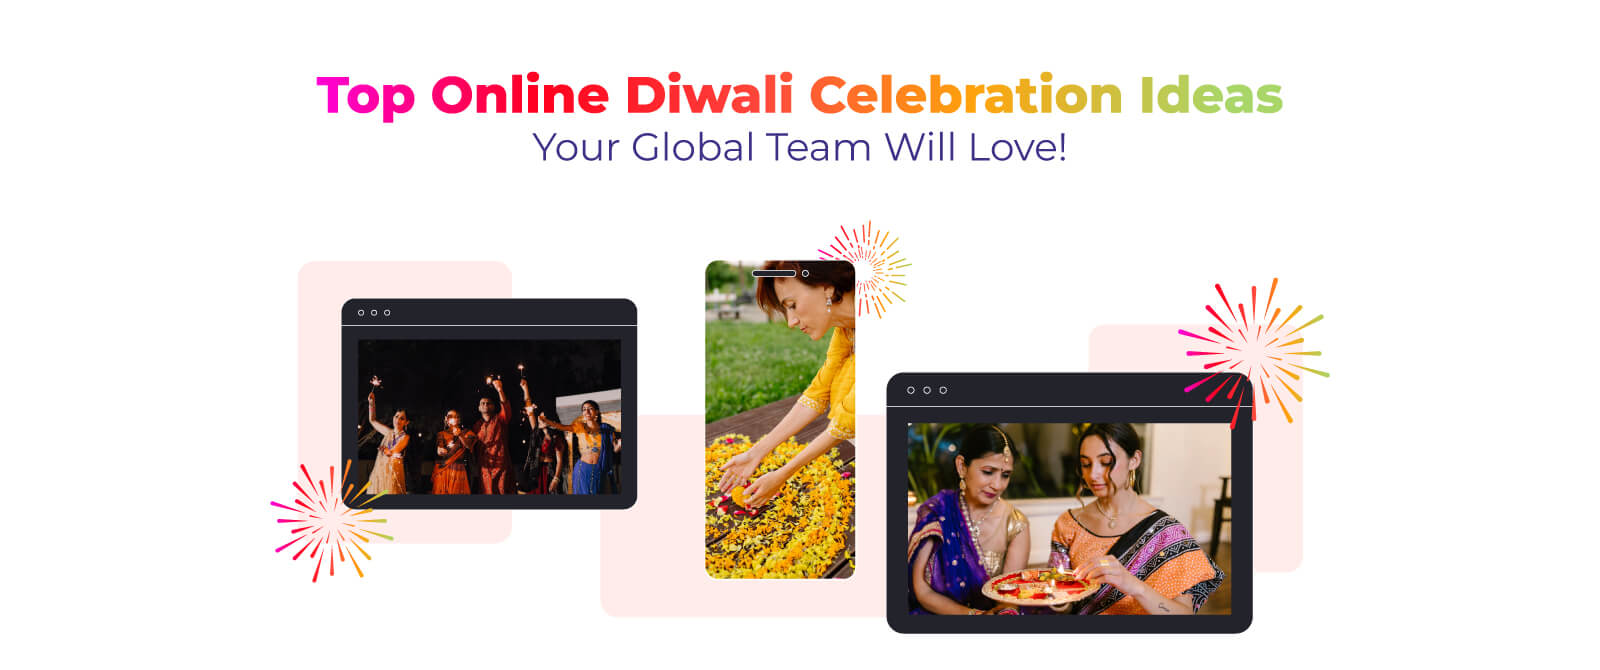 Top Online Diwali Celebration Ideas Your Global Team Will Love!